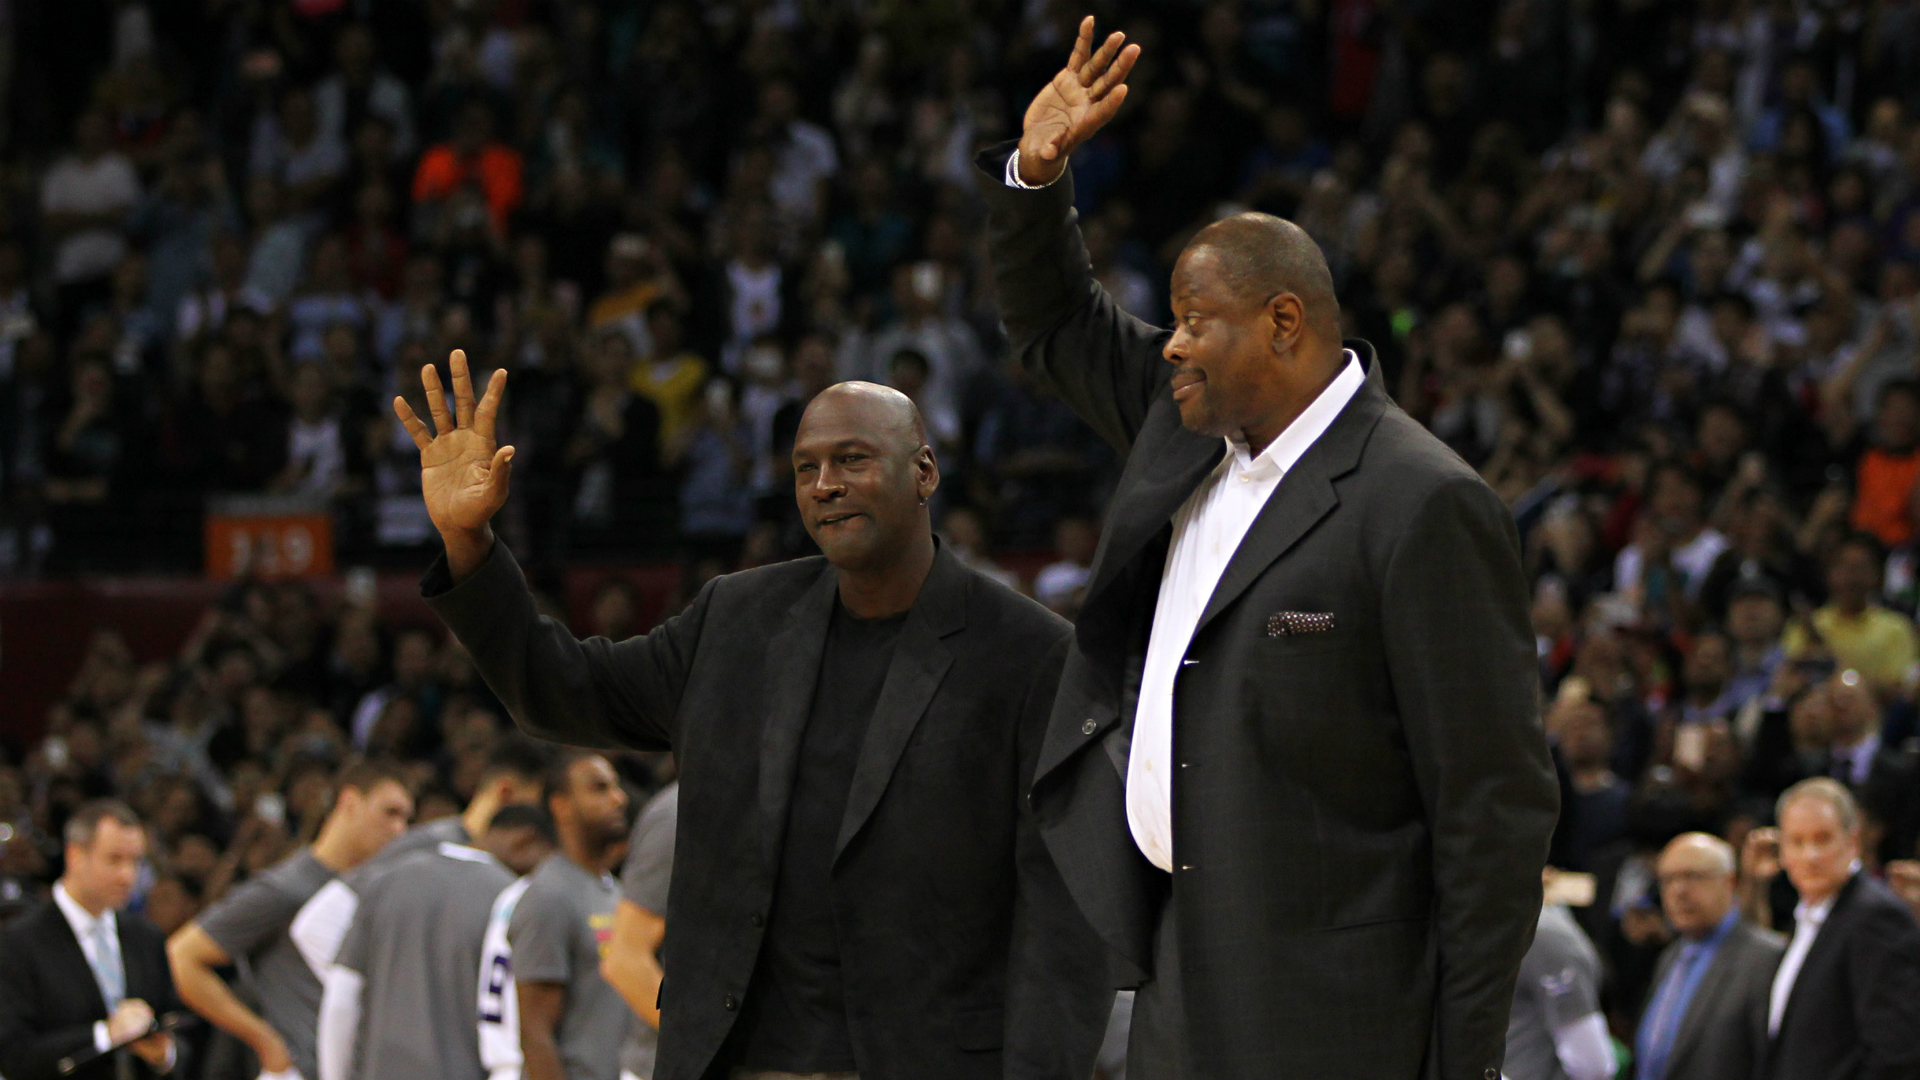 Patrick Ewing knows hes ready to be an NBA head coach Knicks or